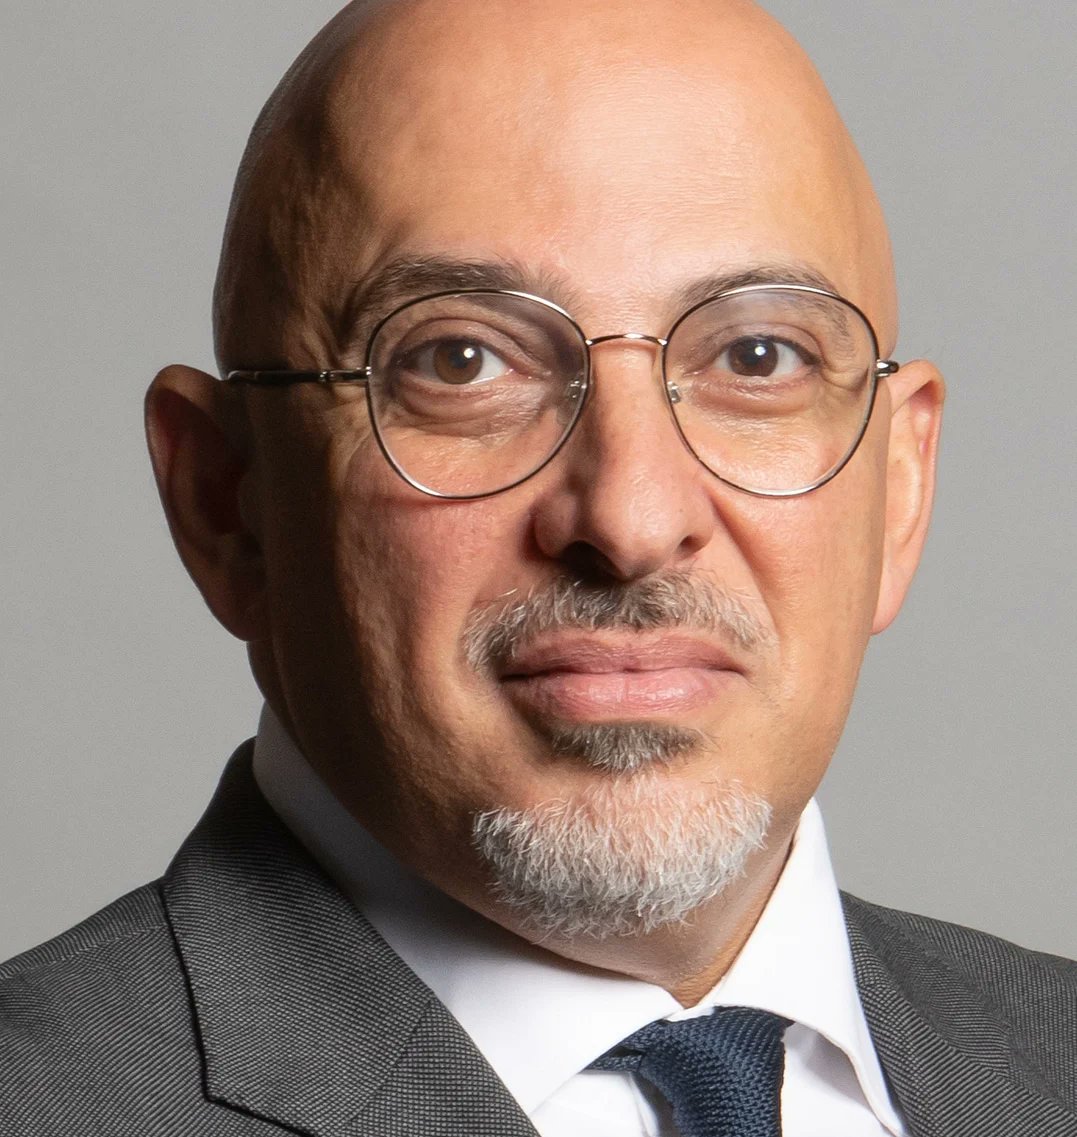 Nadhim Zahawi is writing a book ‘The boy from Baghdad‘

If will feature his escapades in dodging tax, falsely claiming heating to warm his horses, and sending other POOR immigrants to Rwanda.

Strangely it’s expected to sell even less than Liz Truss’ toilet book.